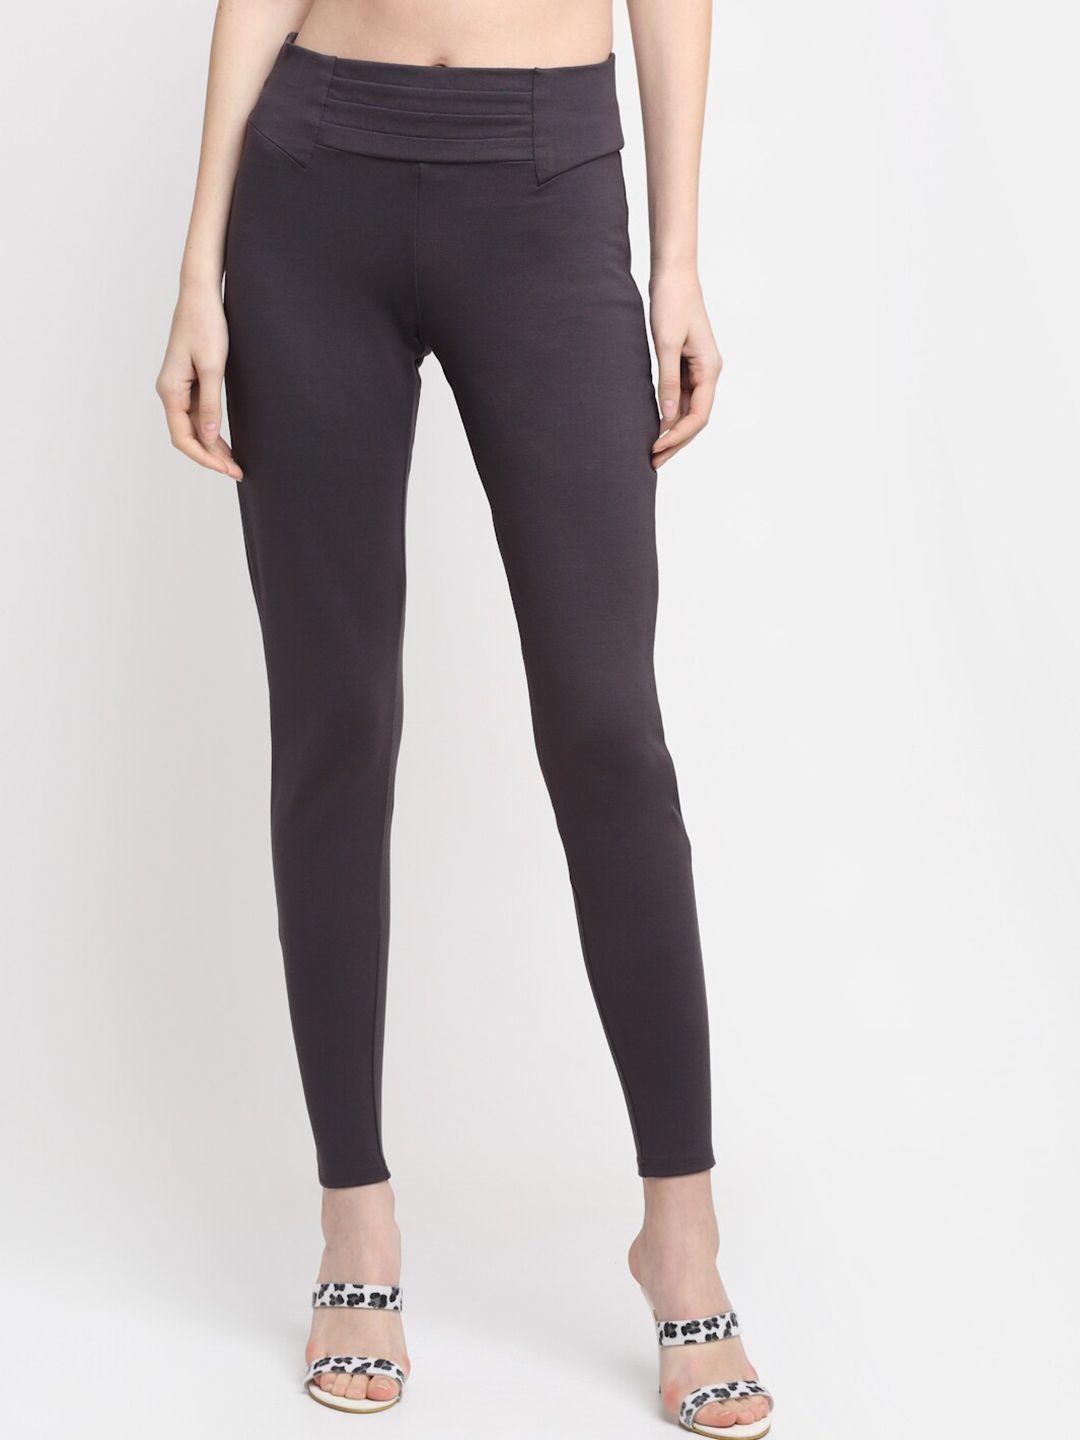 cantabil-women-charcoal-solid-jeggings